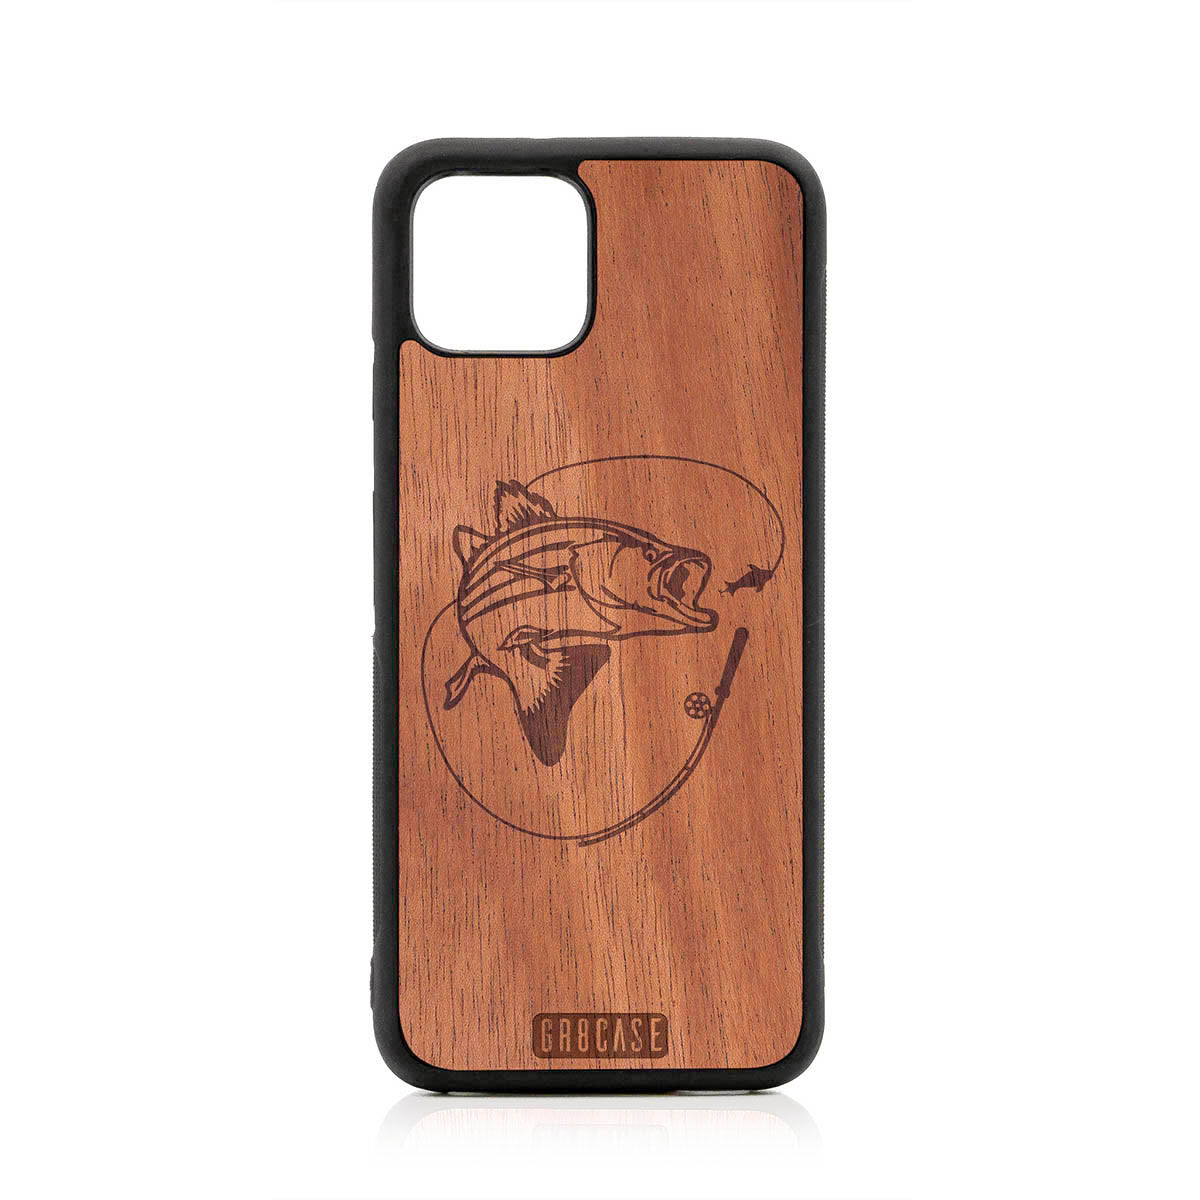 Fish and Reel Design Wood Case For Google Pixel 4 by GR8CASE